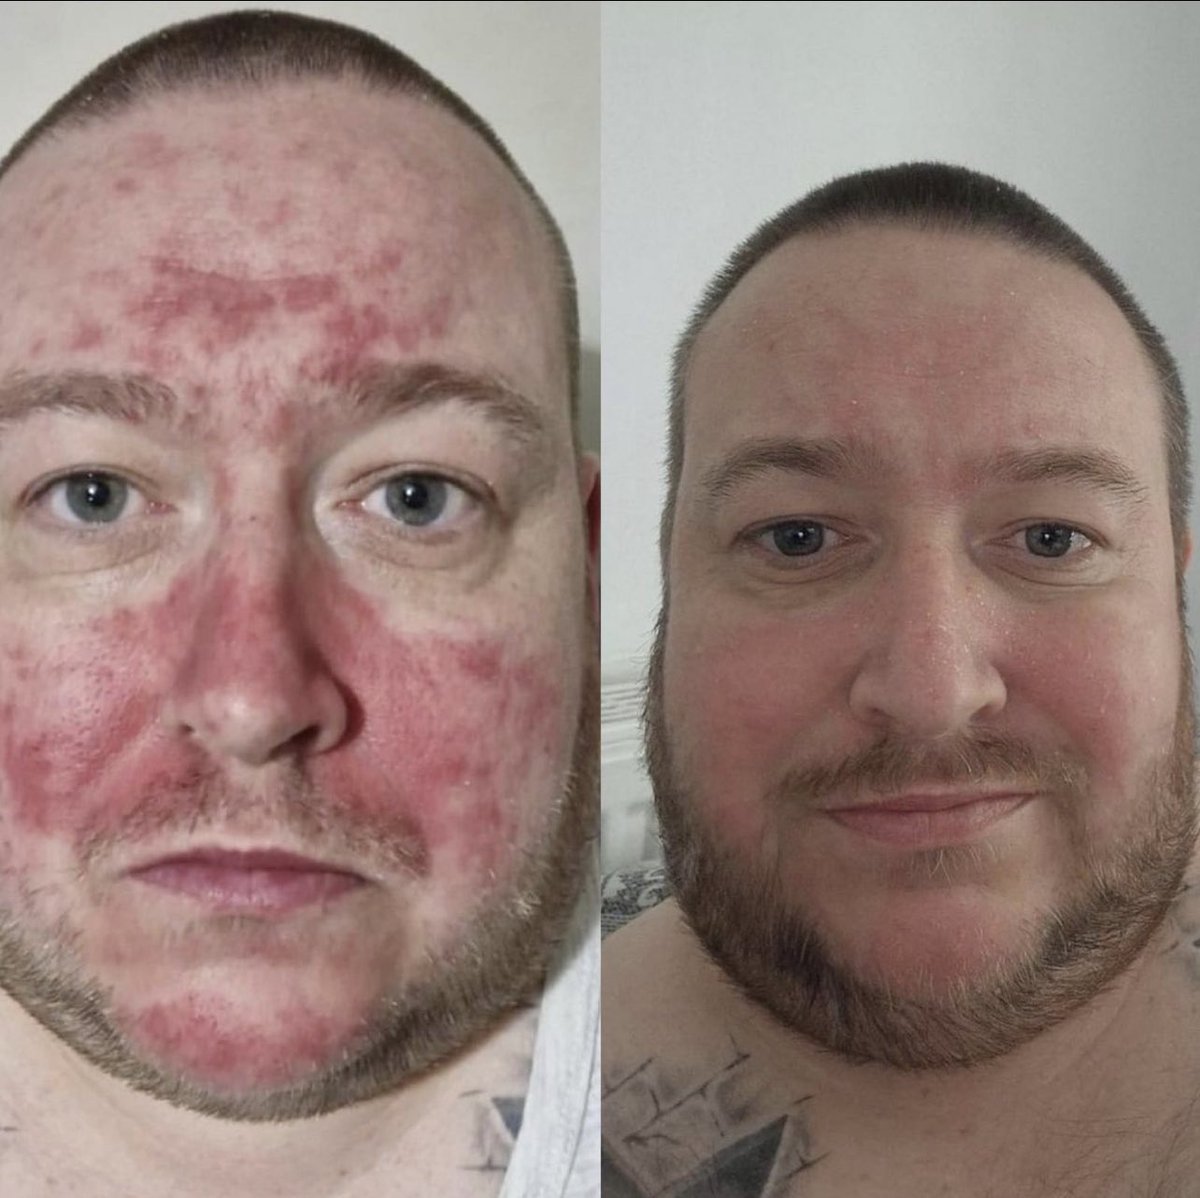 @gazmax01 @supreme_cbd @afowler06 Honestly, mate, it's amazing it's the psoriasis cream from @supreme_cbd look at my before and after pic